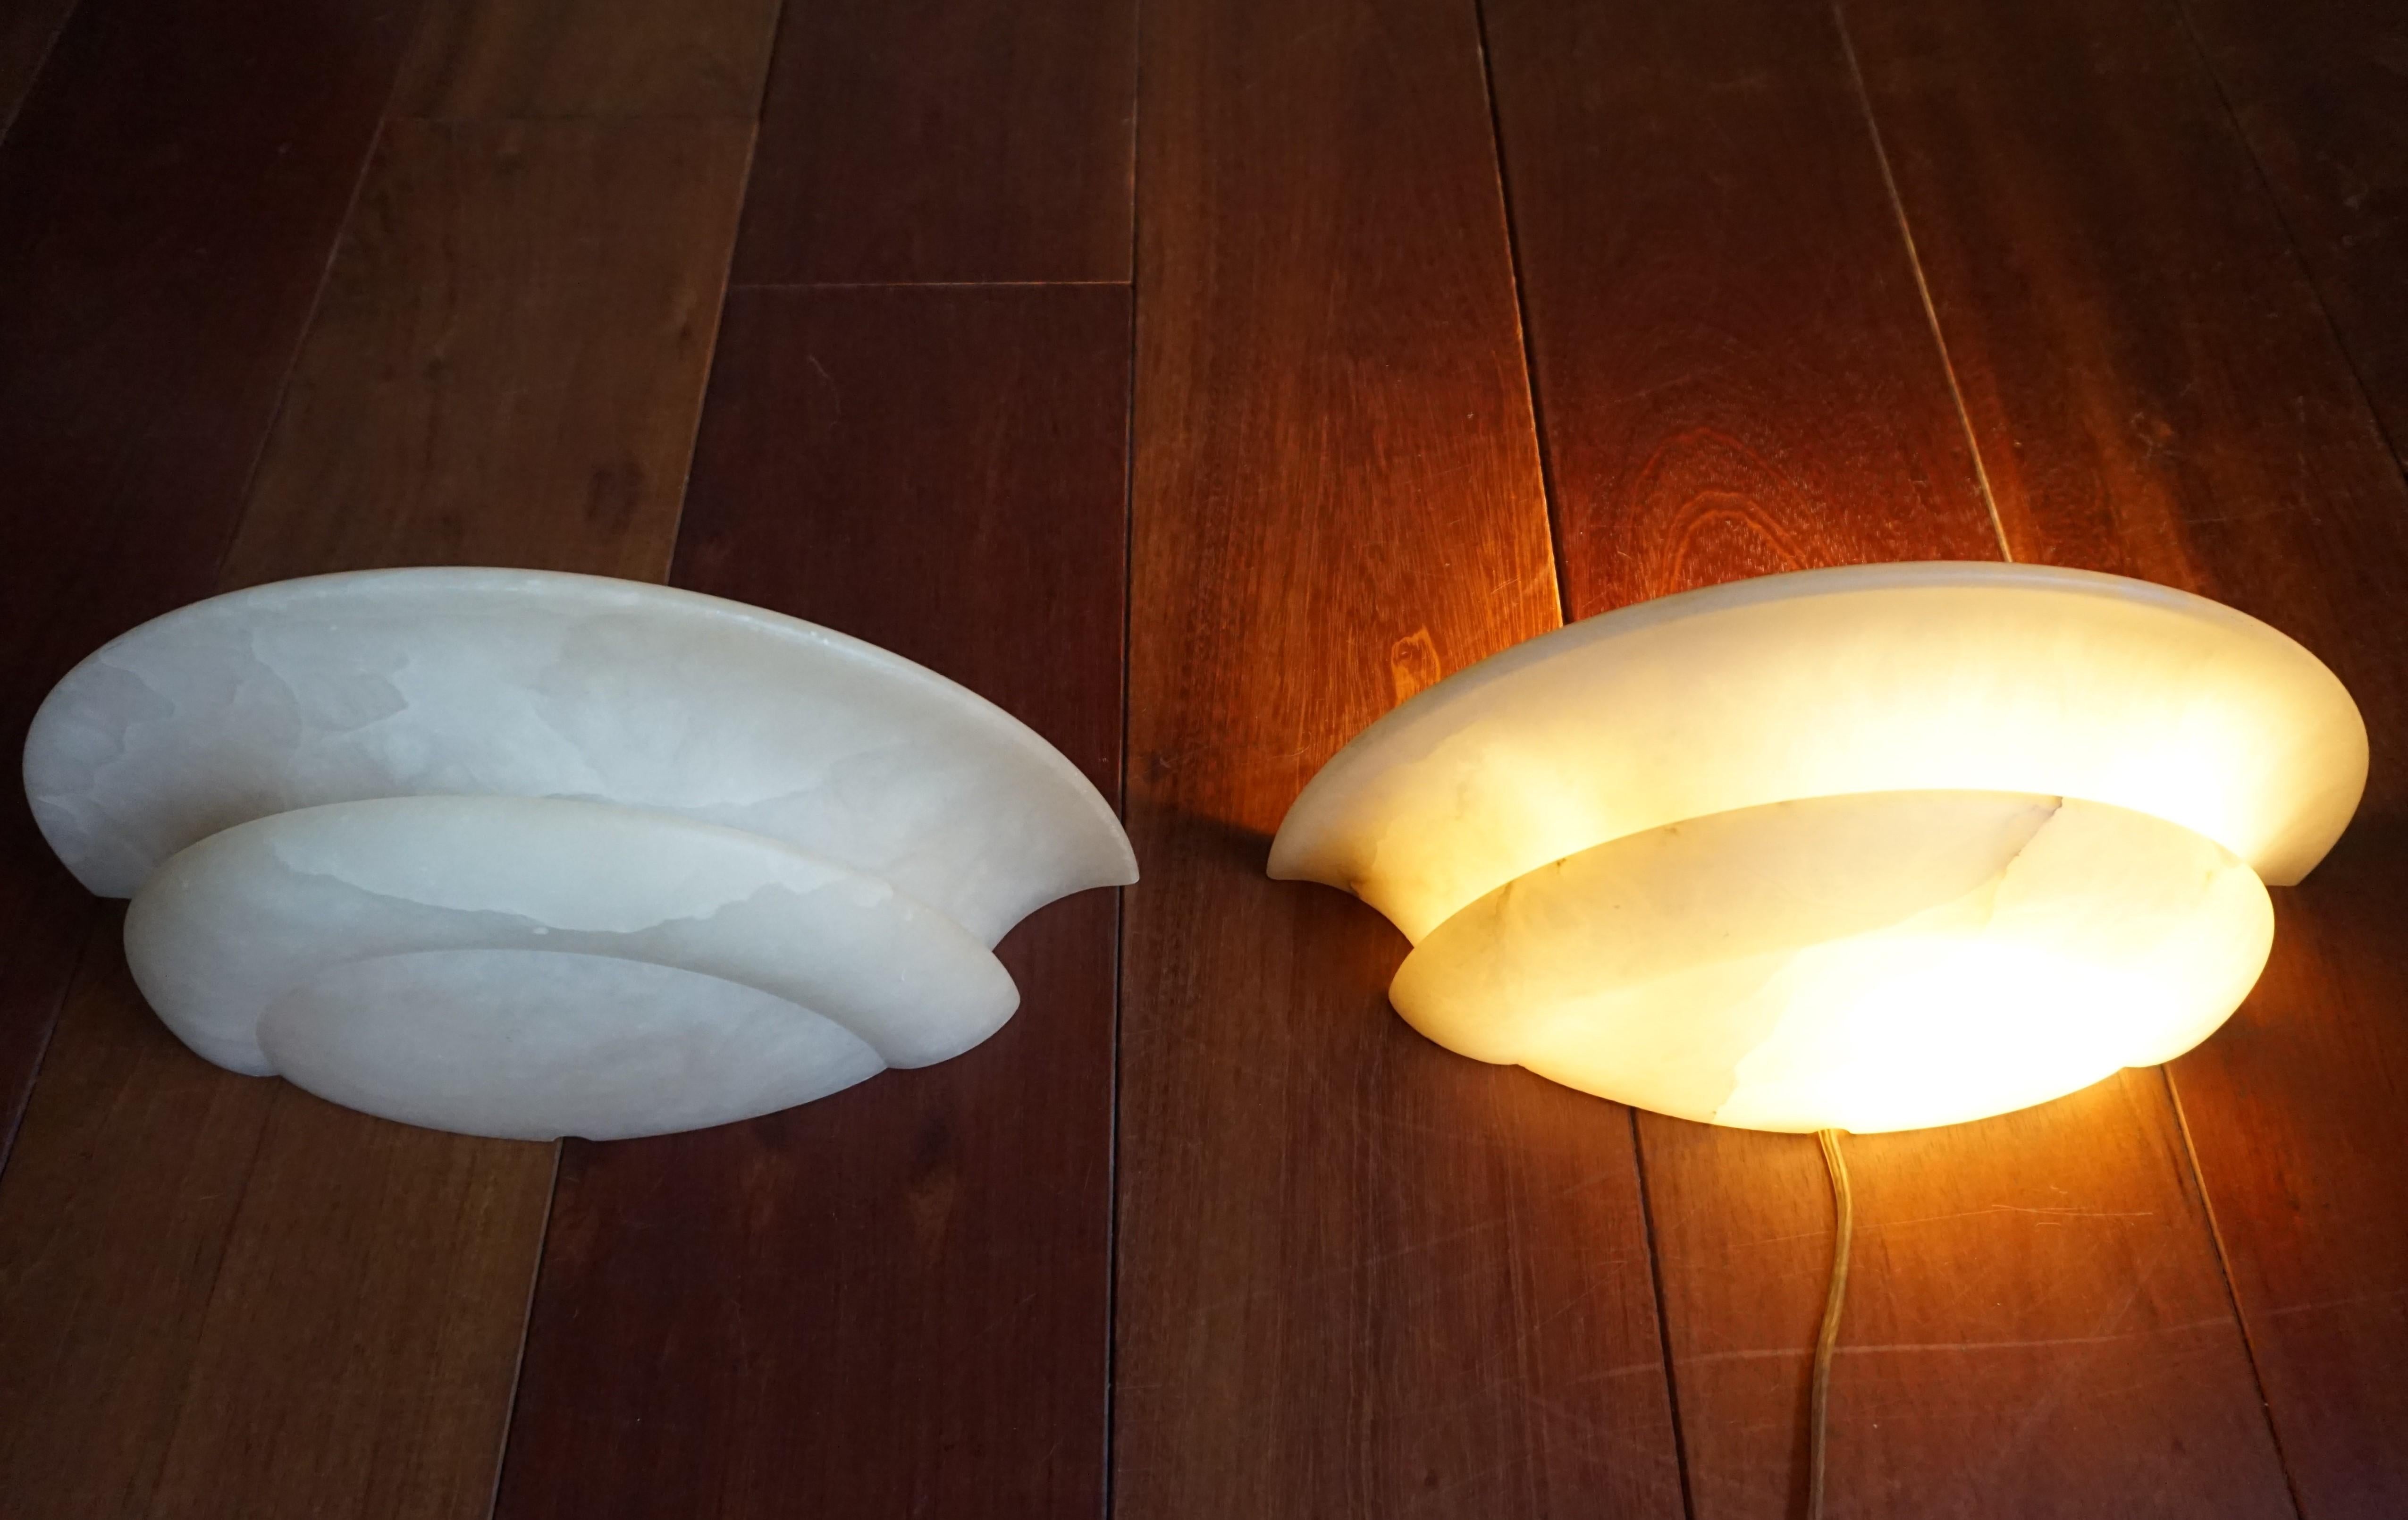 Wonderful shape, perfect size and excellent condition alabaster sconces.

This excellent condition pair of dish-shaped alabaster light fixtures for wall mounting will look great no matter where you decide to use them. They could grace the wall in